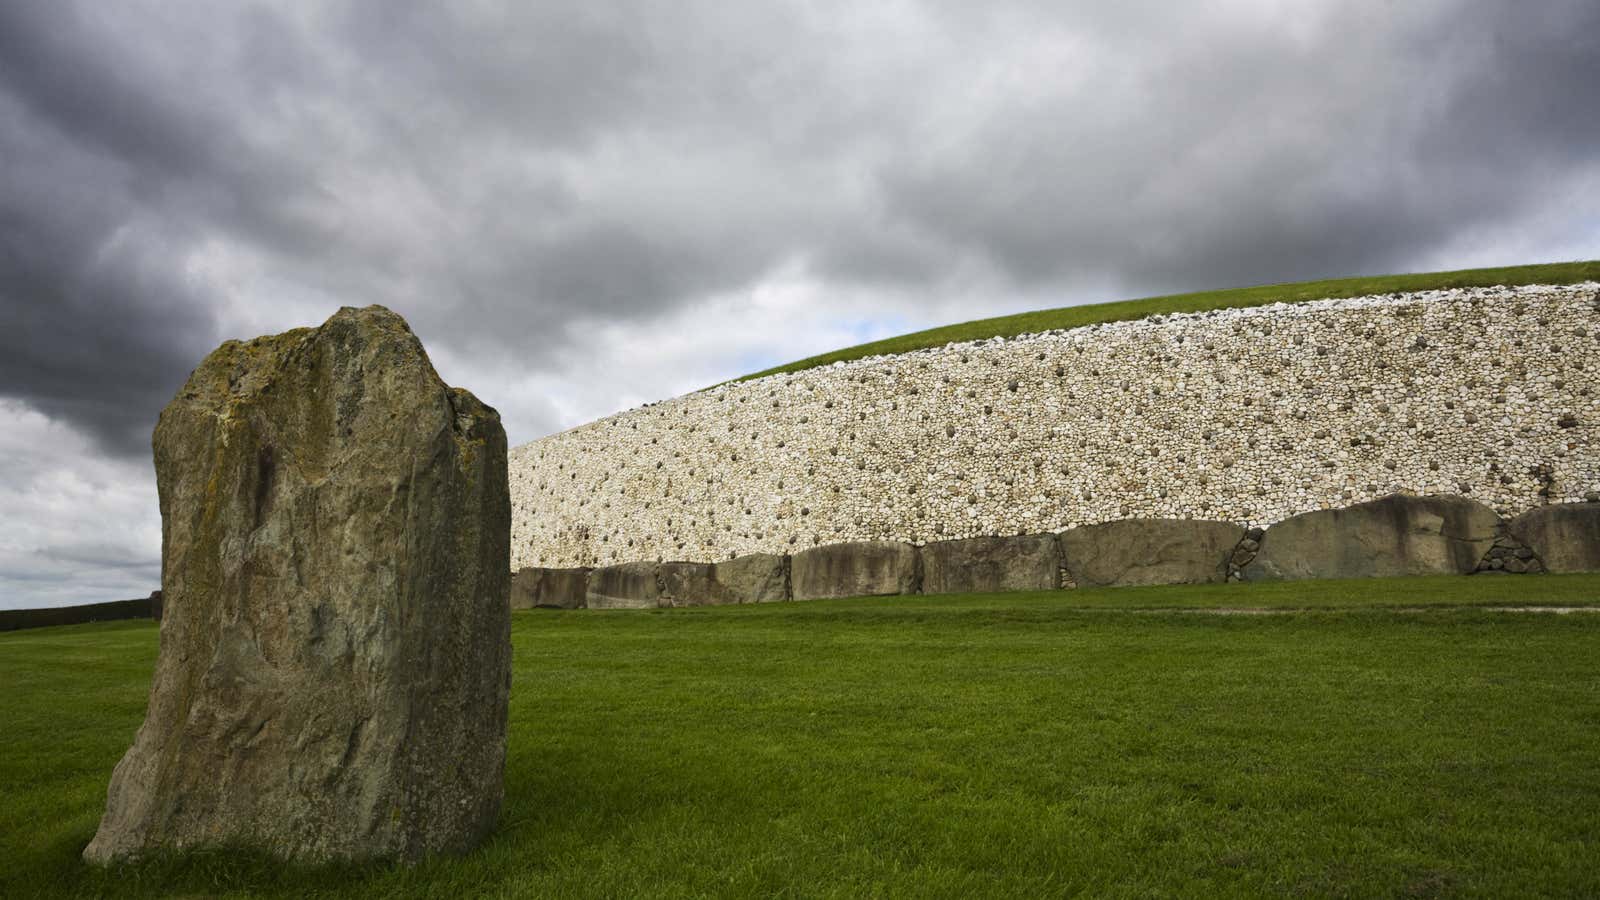 Long before it became the stuff of cheap watches, quartz helped build the Newgrange Monument in Ireland 5,000 years ago.